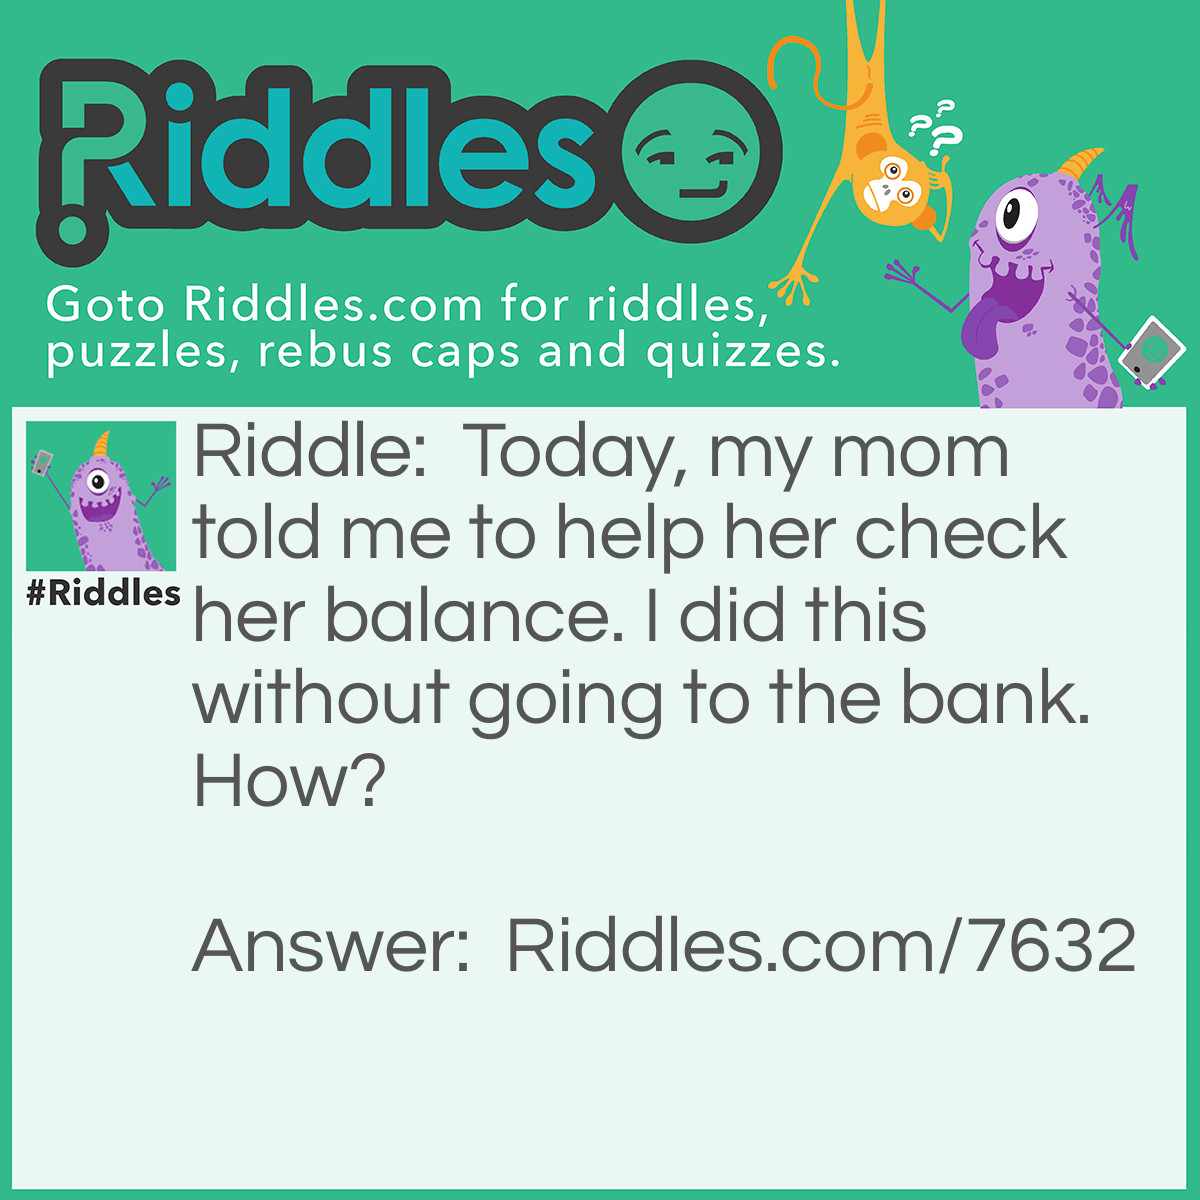 Riddle: Today, my mom told me to help her check her balance. I did this without going to the bank. How? Answer: I pushed her over.